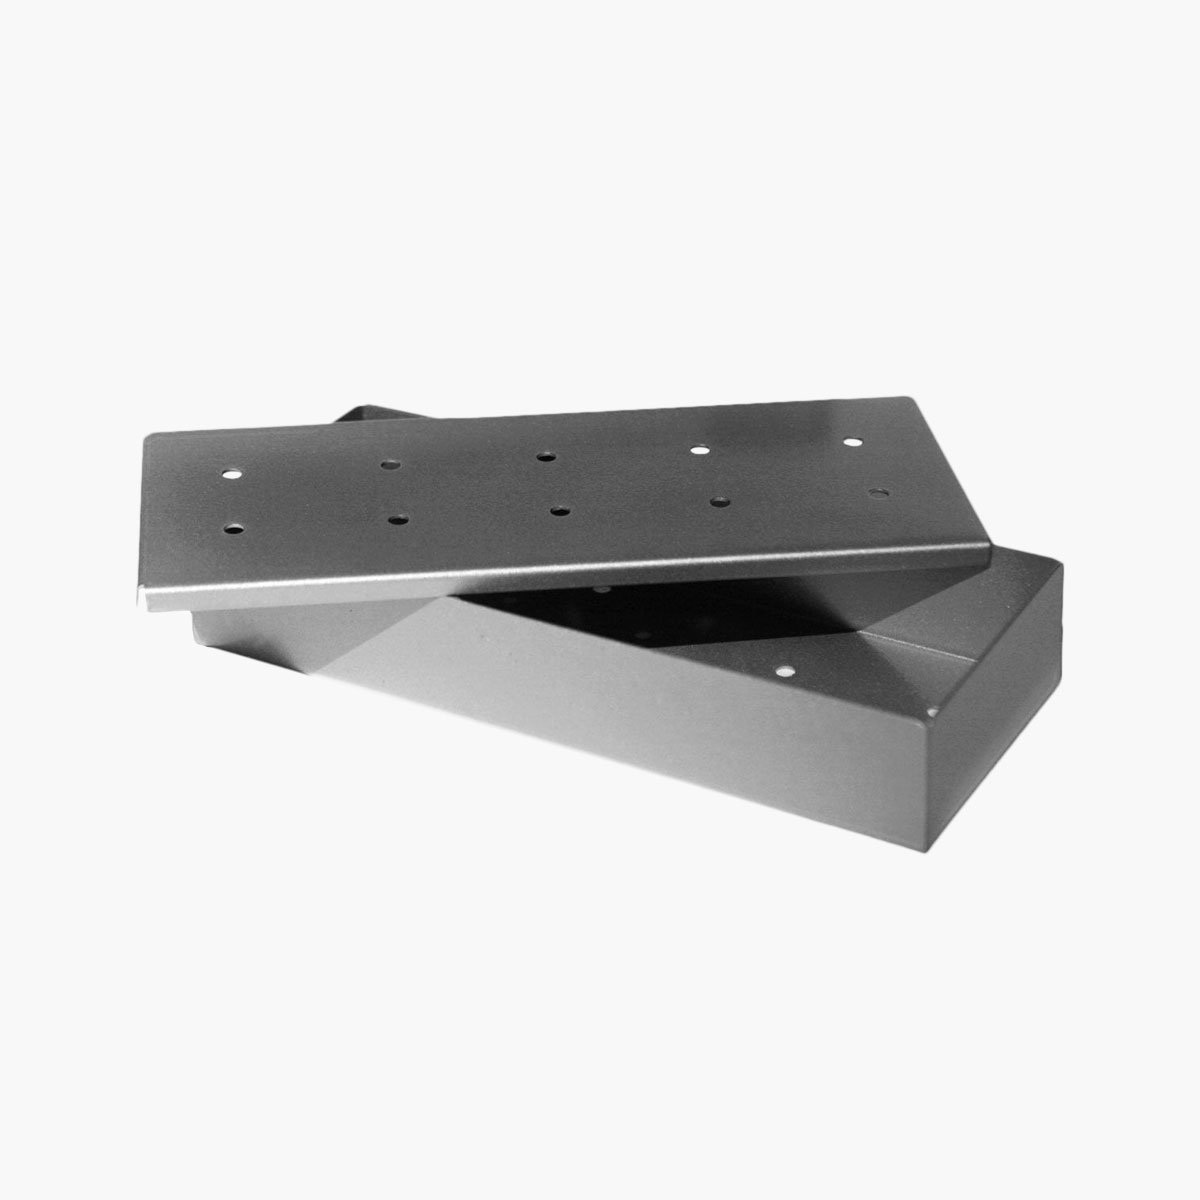 Stainless steel two piece smoker box.